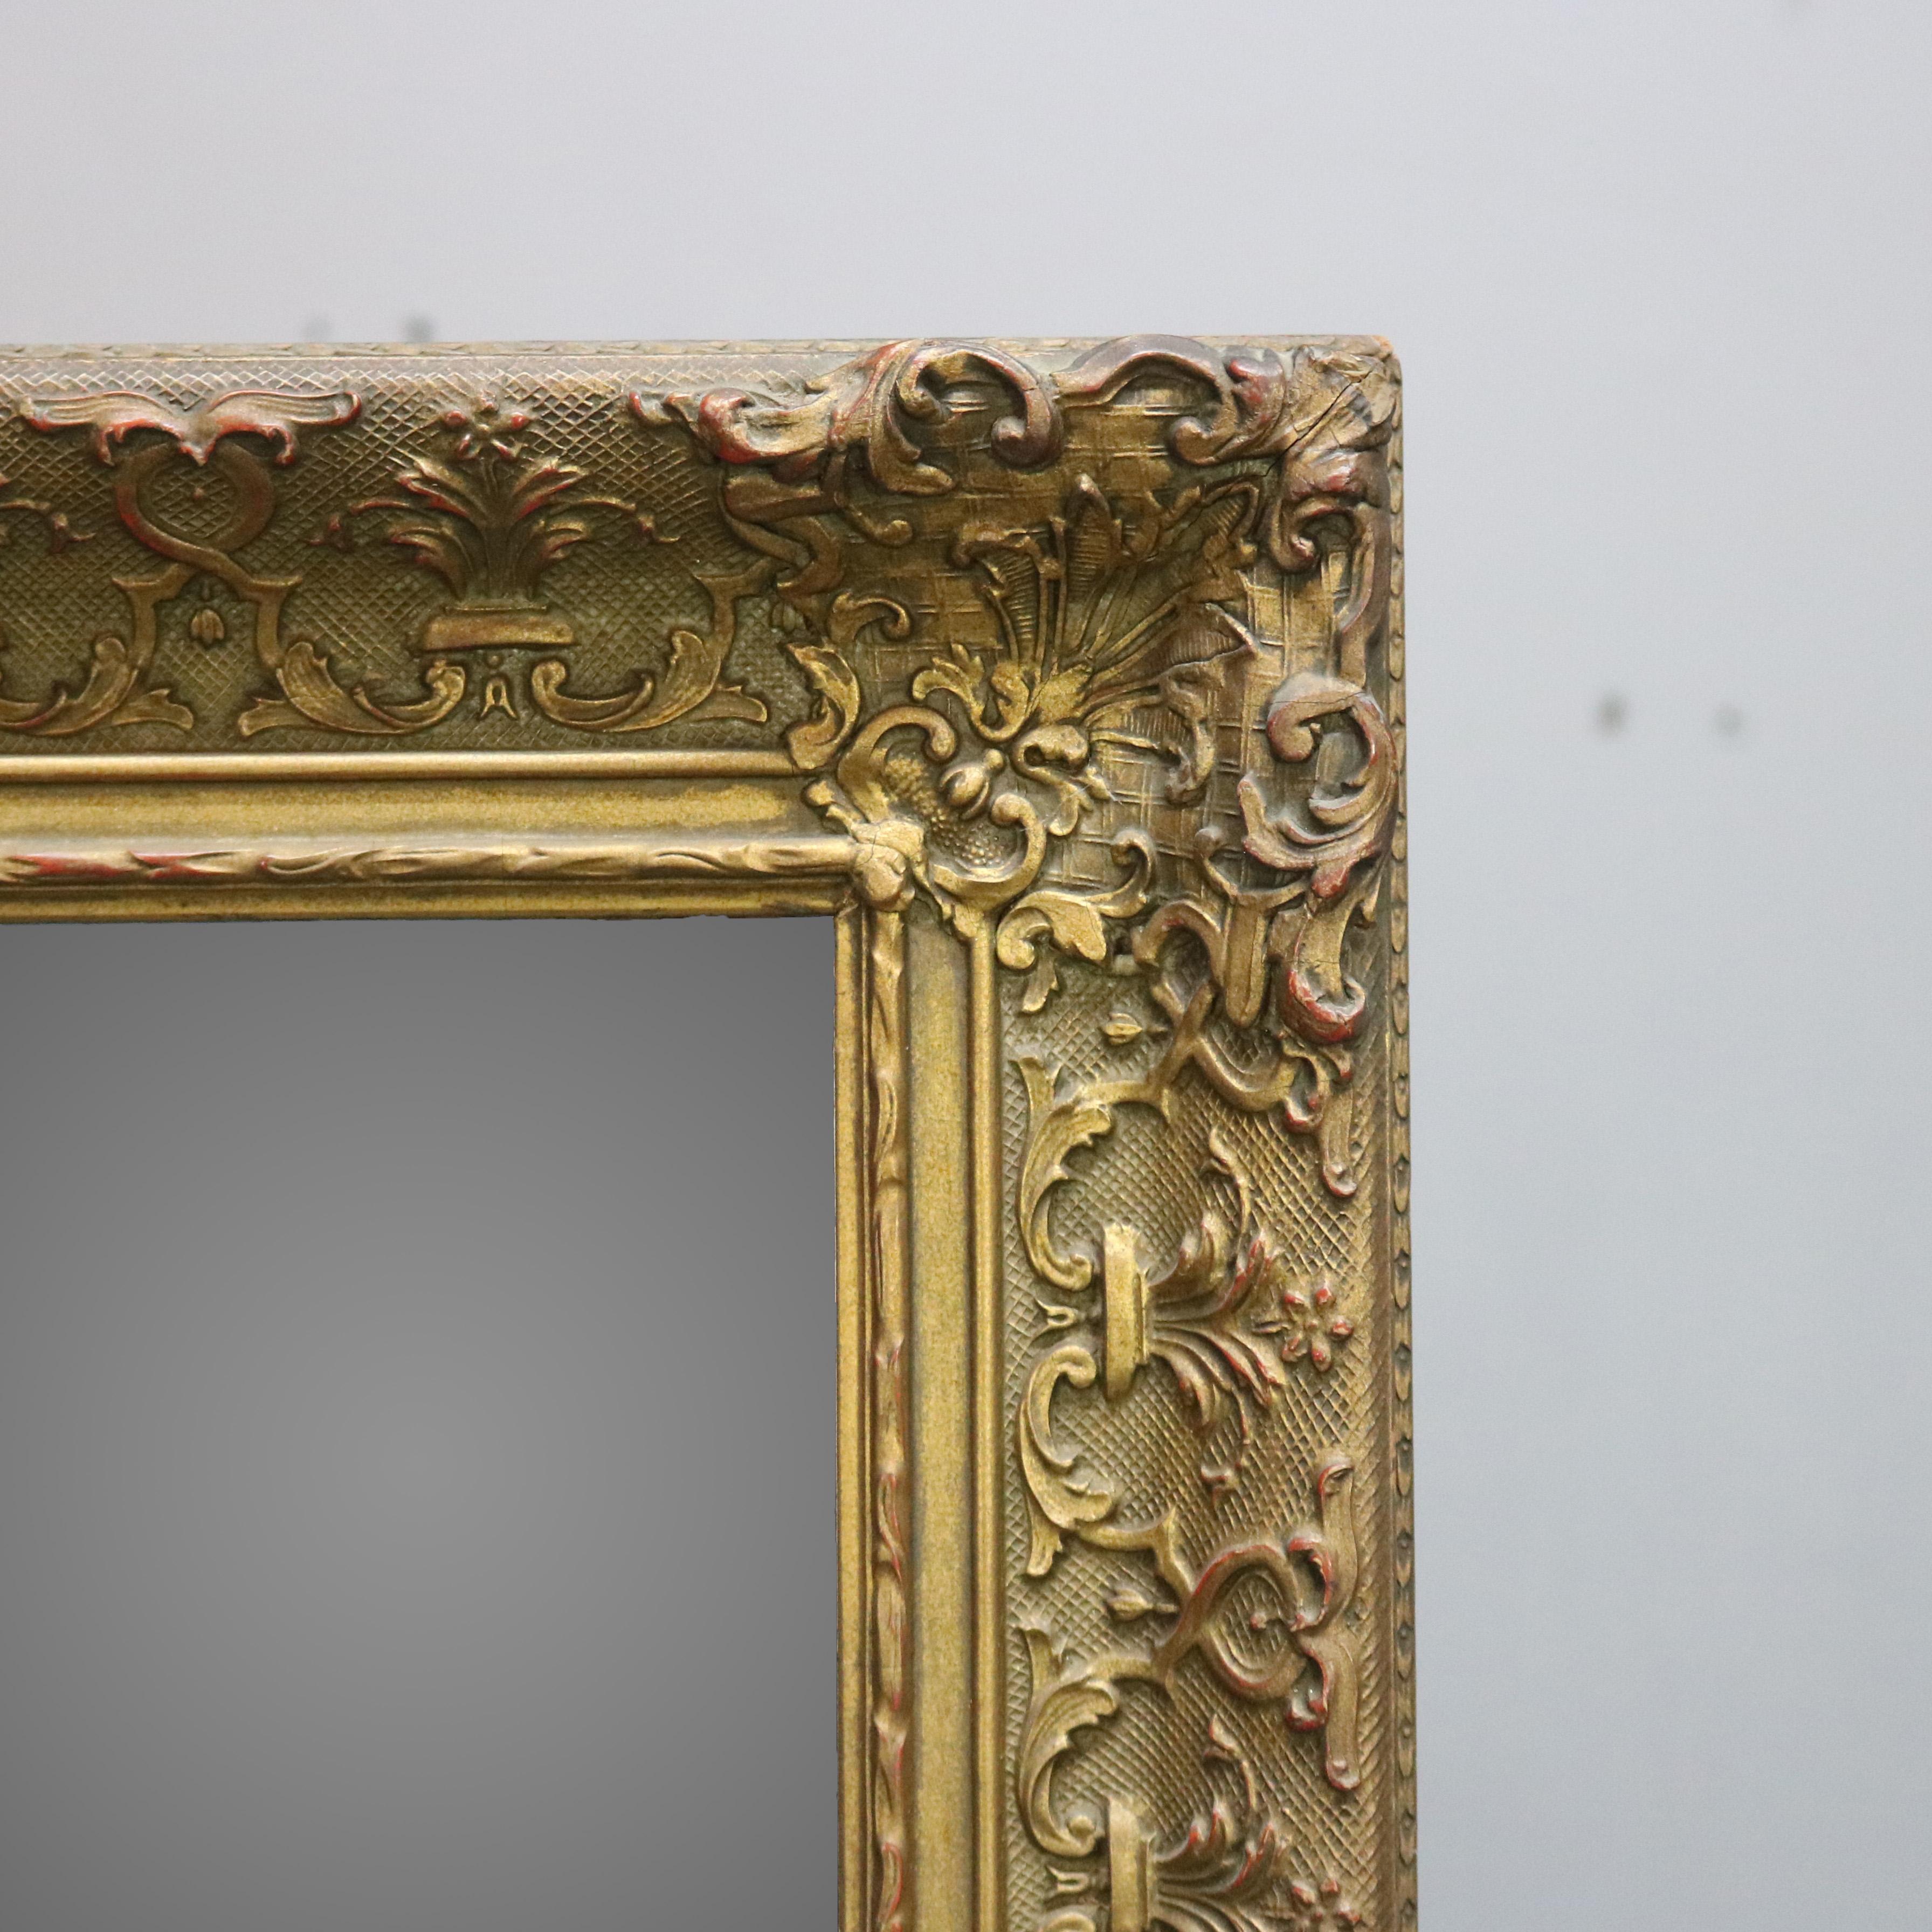 European Antique Continental Scroll and Foliate Giltwood Framed Wall Mirror, circa 1900 For Sale